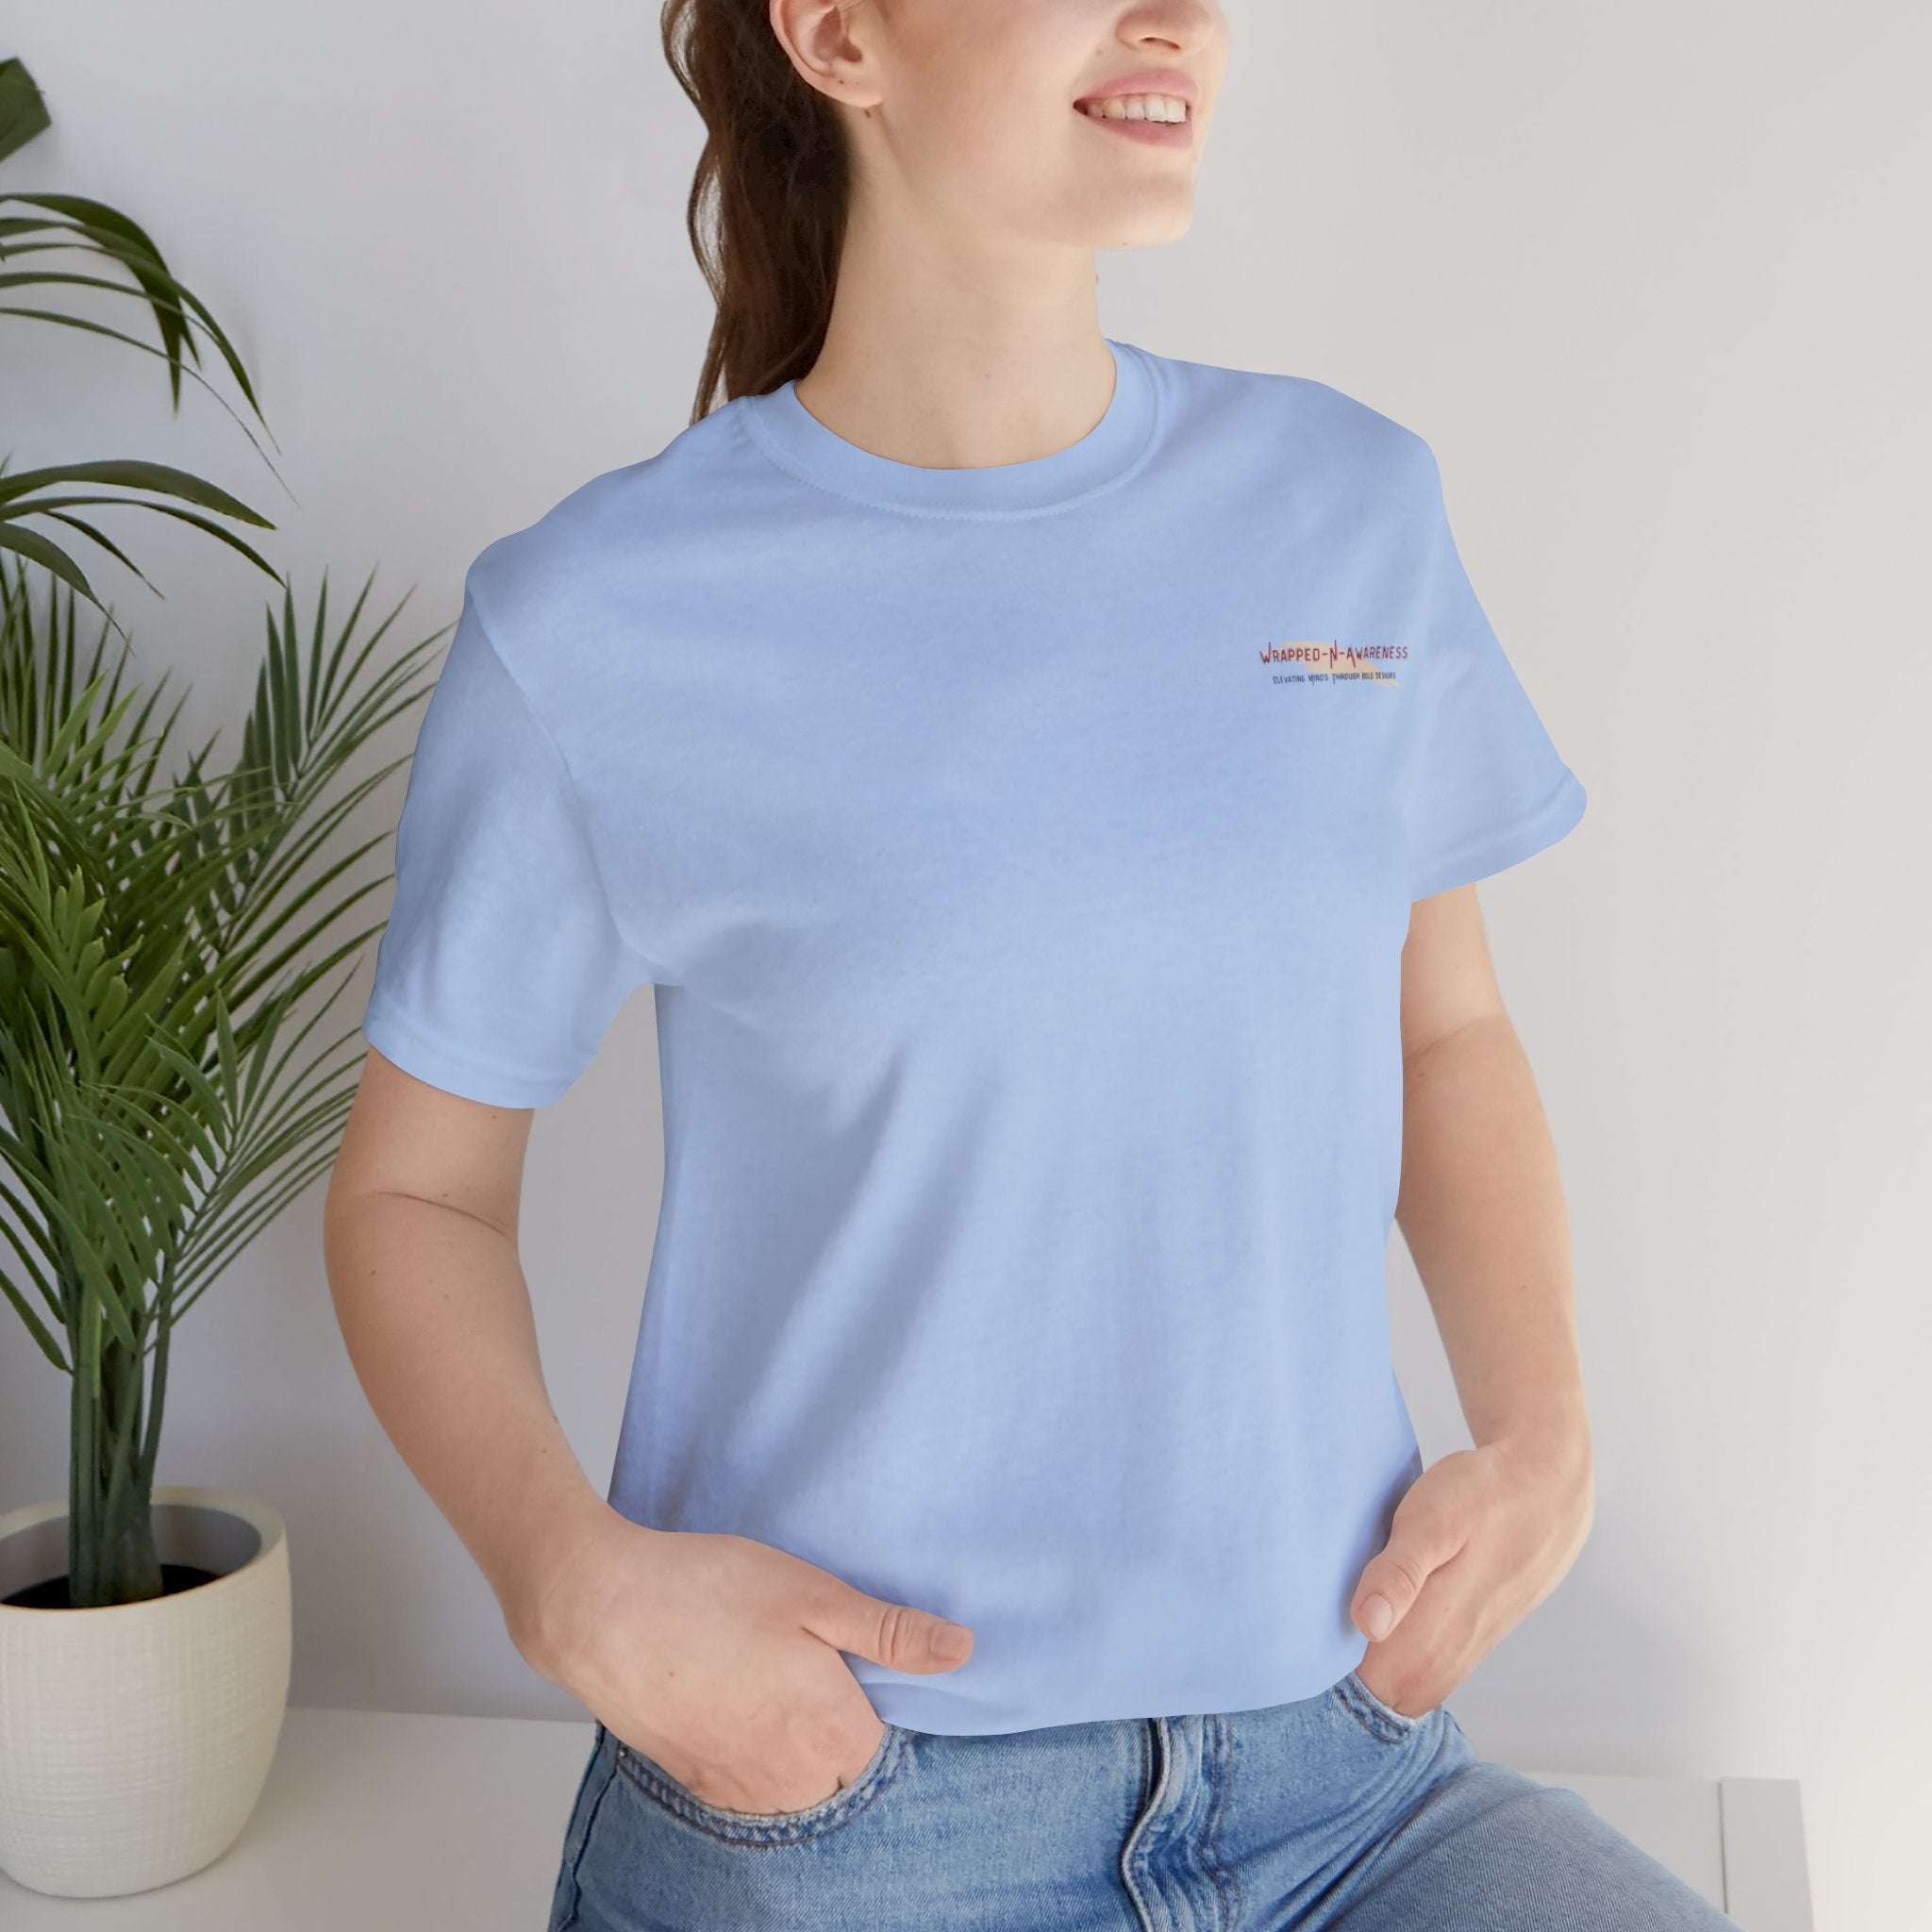 Release Your Mind Jersey Tee - Bella+Canvas 3001 Heather Mauve Airlume Cotton Bella+Canvas 3001 Crew Neckline Jersey Short Sleeve Lightweight Fabric Mental Health Support Retail Fit Tear-away Label Tee Unisex Tee T-Shirt 9119066787280963629_2048 Printify